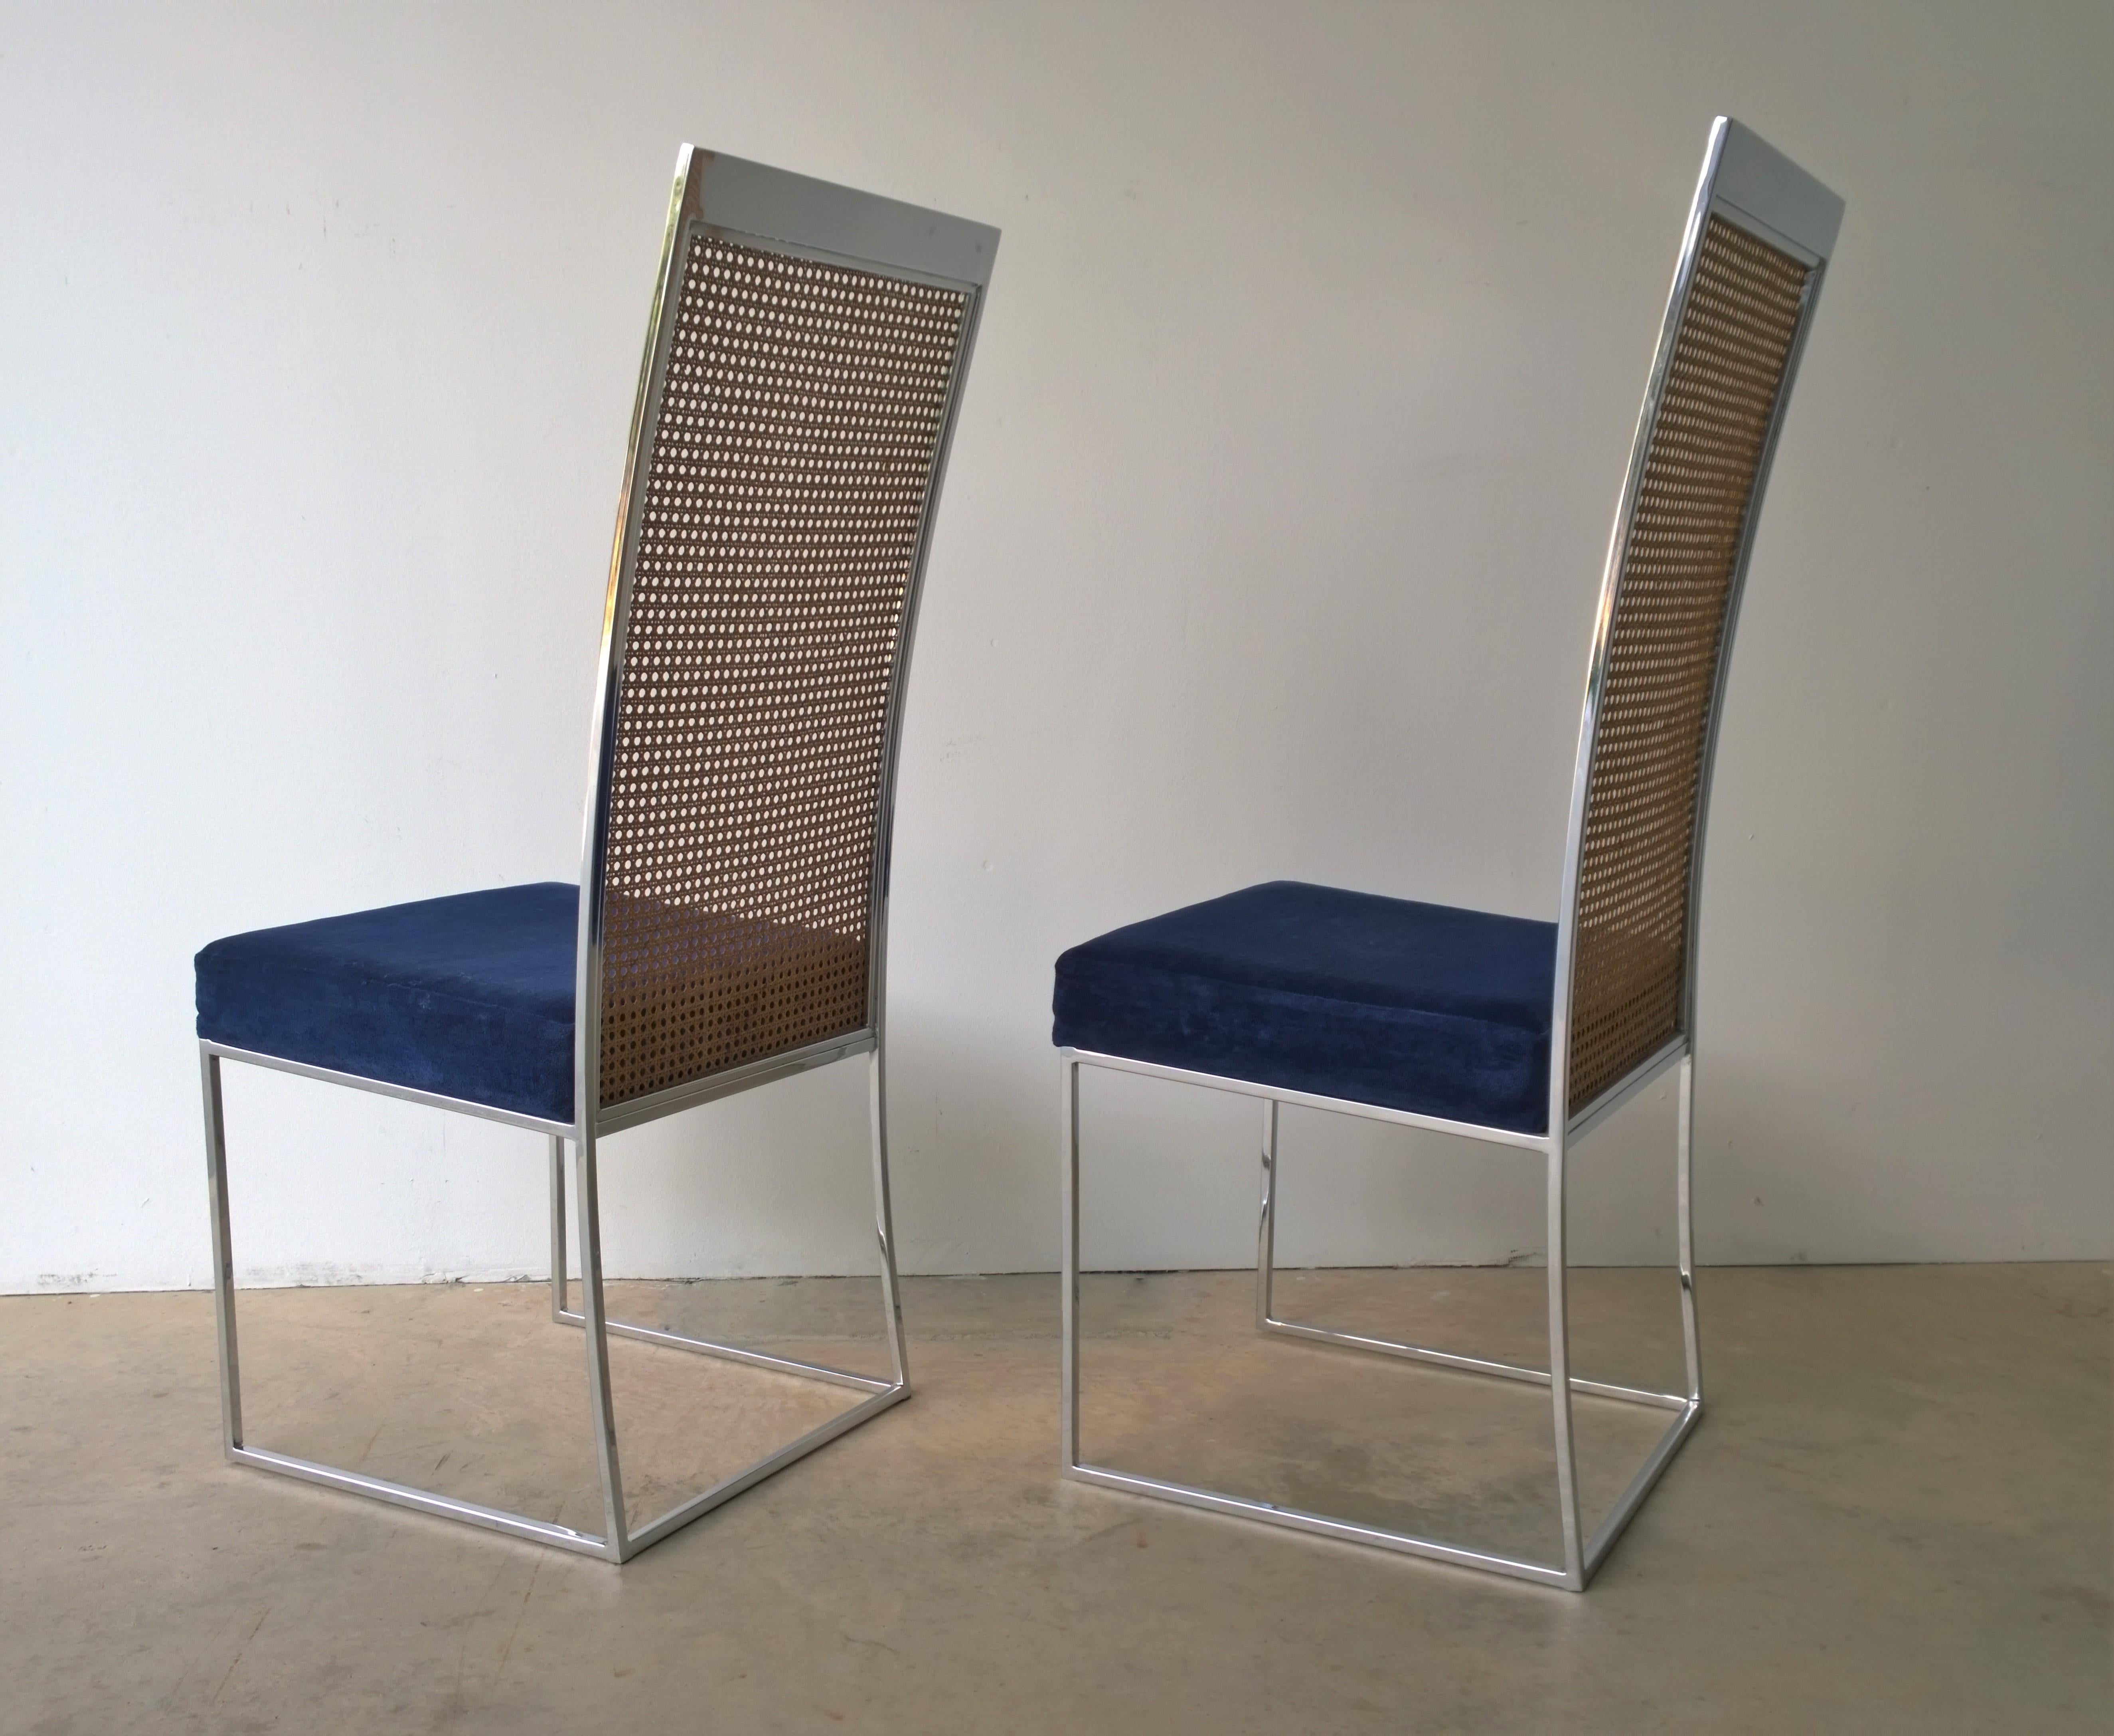 Offered is a set of 2 Mid-Century Modern original upholstery in navy blue chenille or cotton velvet Milo Baughman for Thayer Coggin chrome frame and cane back side (armless) dining chairs. The wood cane is in very good condition which is quite